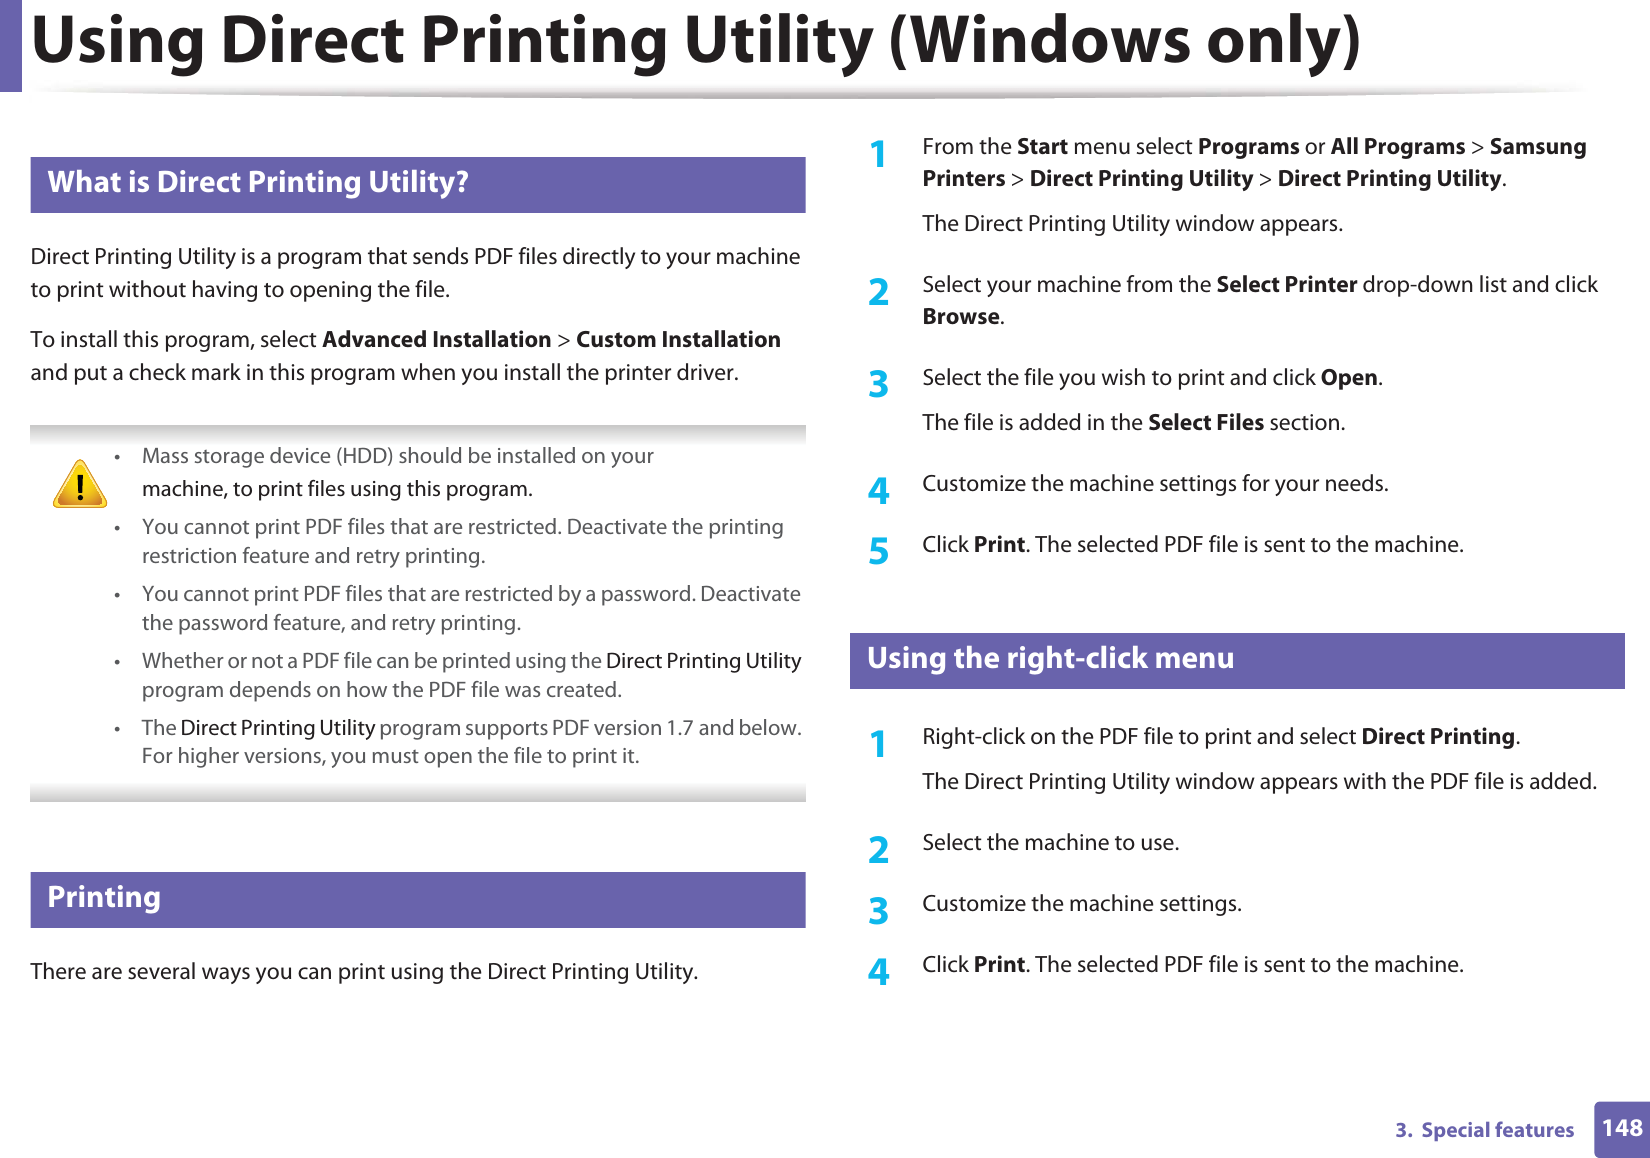 1483.  Special featuresUsing Direct Printing Utility (Windows only)3 What is Direct Printing Utility?Direct Printing Utility is a program that sends PDF files directly to your machine to print without having to opening the file.To install this program, select Advanced Installation &gt; Custom Installation and put a check mark in this program when you install the printer driver. • Mass storage device (HDD) should be installed on yourmachine, to print files using this program.• You cannot print PDF files that are restricted. Deactivate the printing restriction feature and retry printing.• You cannot print PDF files that are restricted by a password. Deactivate the password feature, and retry printing.• Whether or not a PDF file can be printed using the Direct Printing Utility program depends on how the PDF file was created.• The Direct Printing Utility program supports PDF version 1.7 and below. For higher versions, you must open the file to print it. 4 PrintingThere are several ways you can print using the Direct Printing Utility.1From the Start menu select Programs or All Programs &gt; Samsung Printers &gt; Direct Printing Utility &gt; Direct Printing Utility.The Direct Printing Utility window appears.2  Select your machine from the Select Printer drop-down list and click Browse.3  Select the file you wish to print and click Open.The file is added in the Select Files section.4  Customize the machine settings for your needs. 5  Click Print. The selected PDF file is sent to the machine.5 Using the right-click menu1Right-click on the PDF file to print and select Direct Printing.The Direct Printing Utility window appears with the PDF file is added.2  Select the machine to use.3  Customize the machine settings. 4  Click Print. The selected PDF file is sent to the machine.